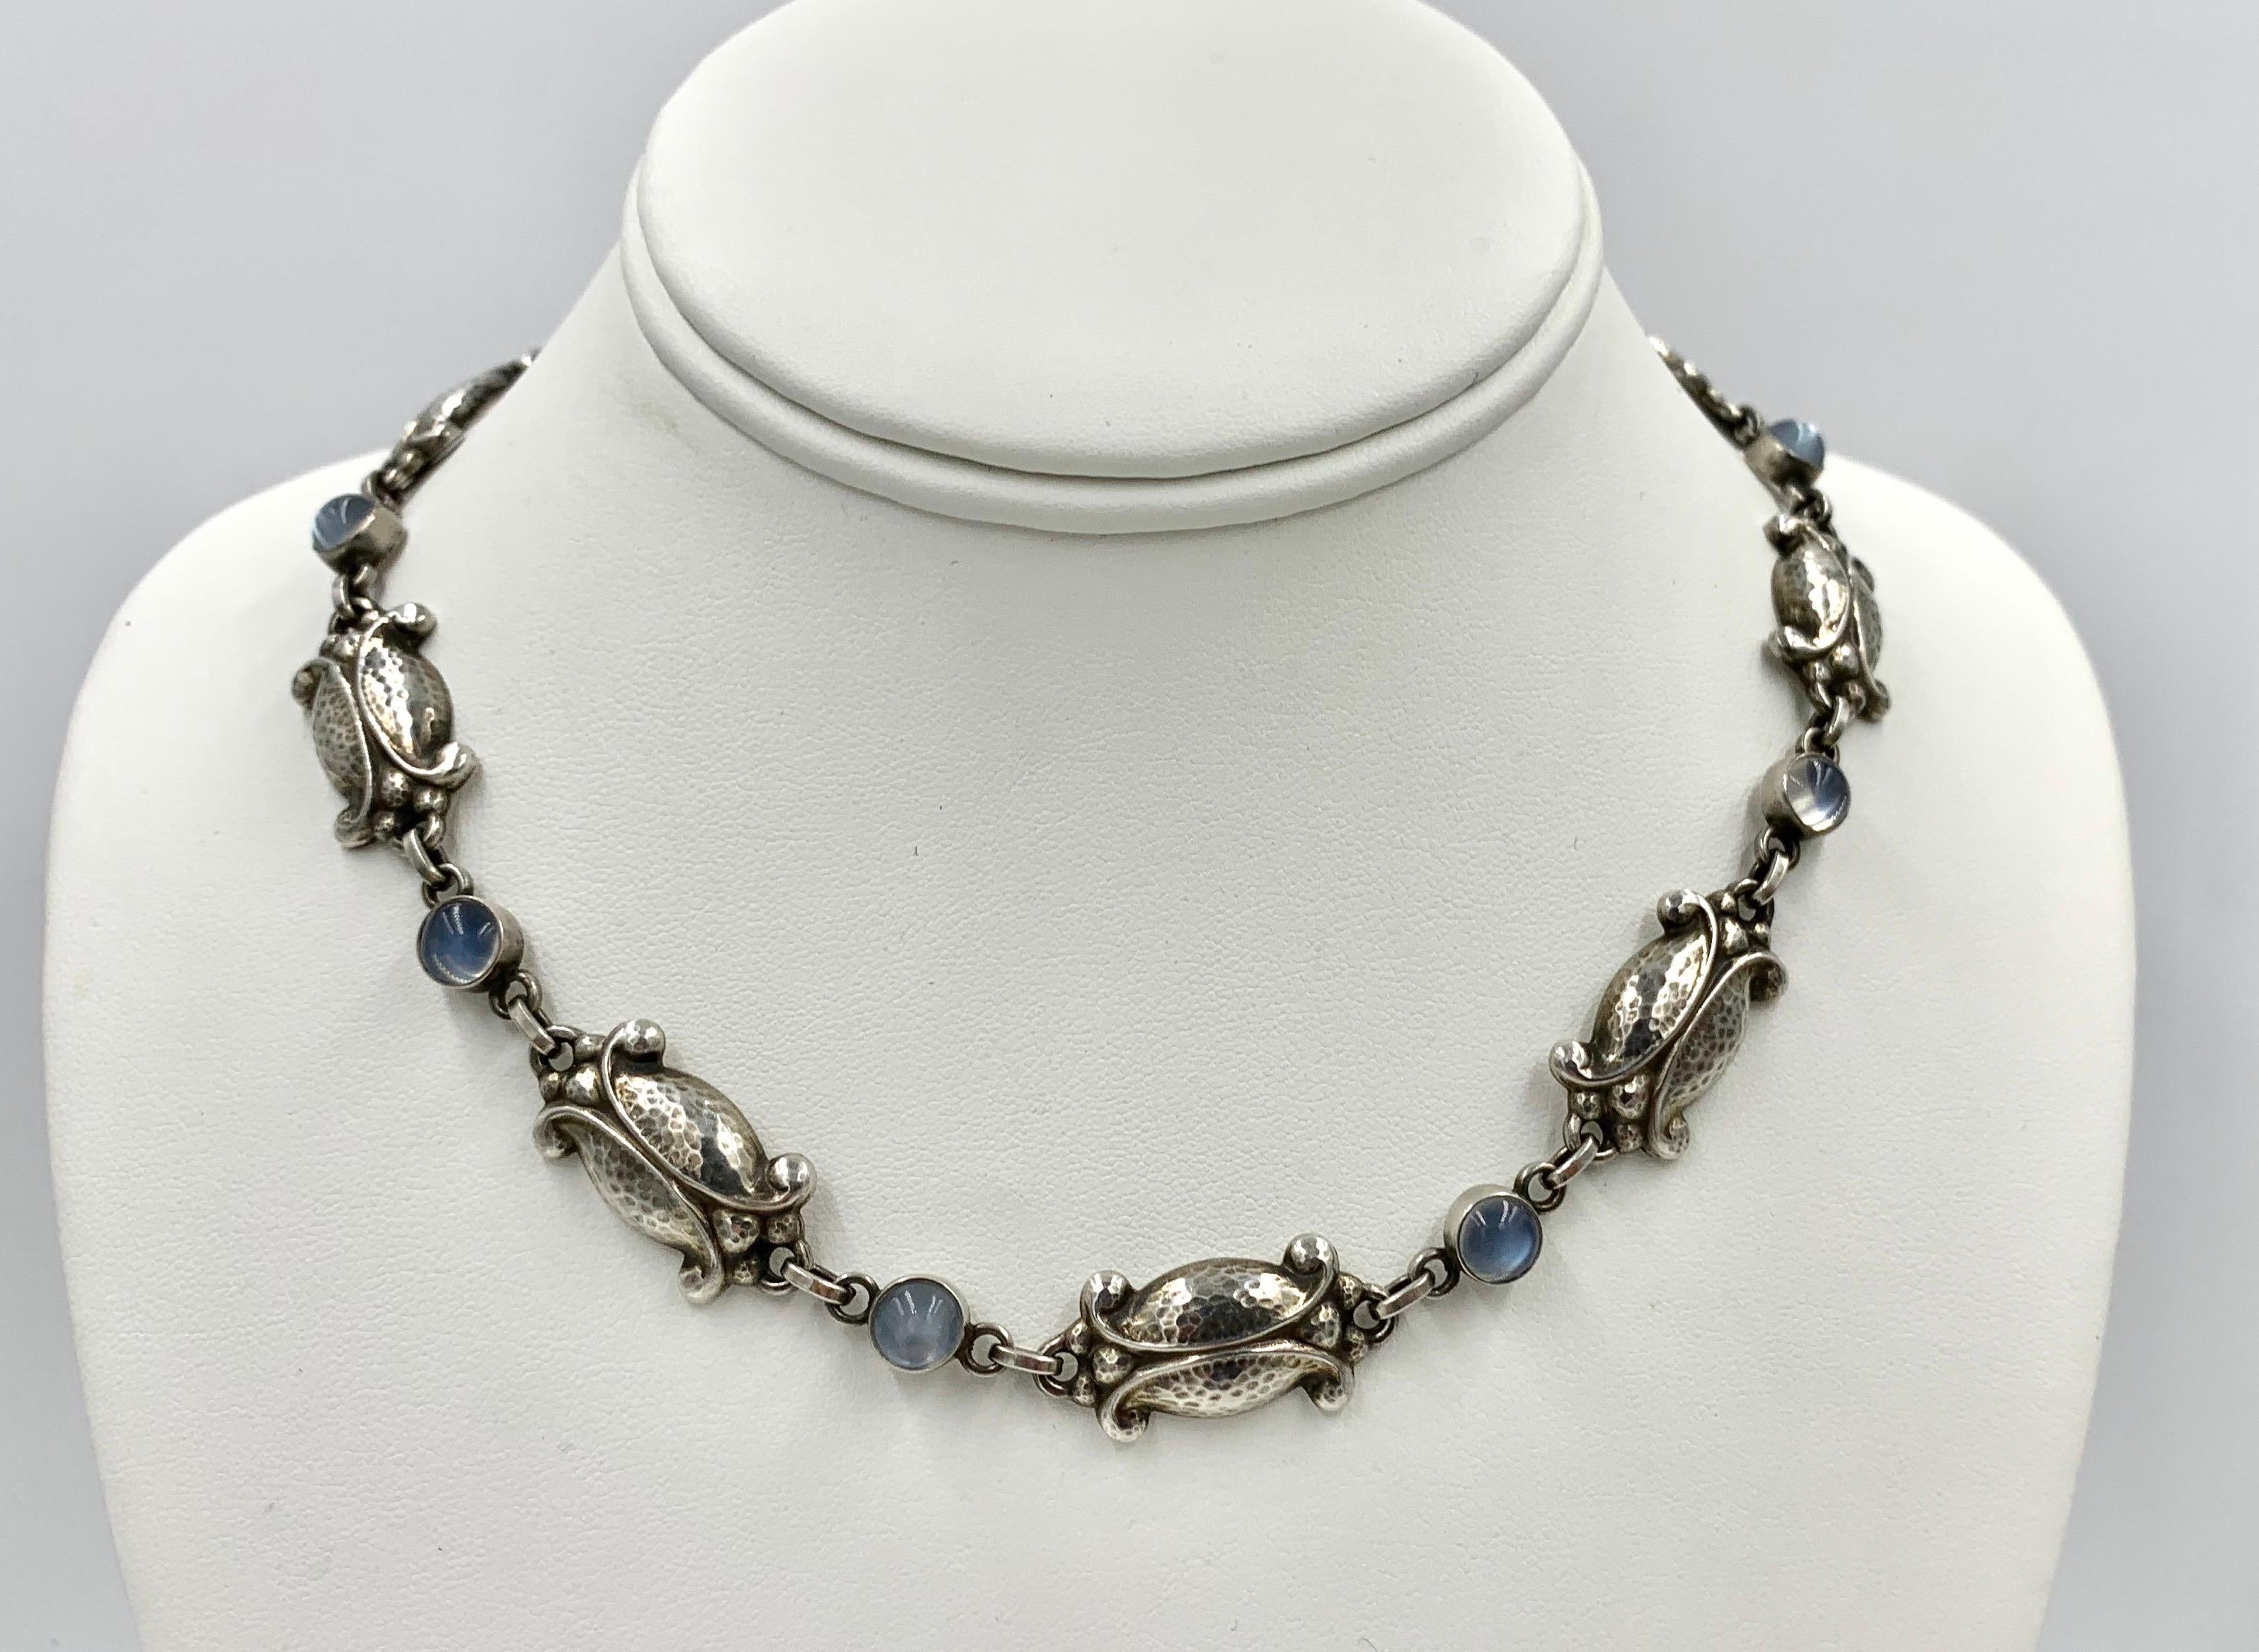 Georg Jensen Vintage Moonlight Blossom Sterling Silver Necklace No. 15 with Moonstones.  16.5 inches long.

This is a gorgeous example of a necklace that can be worn day or evening.   The Moonstone Moonlight Blossom Necklace has beautiful patina on